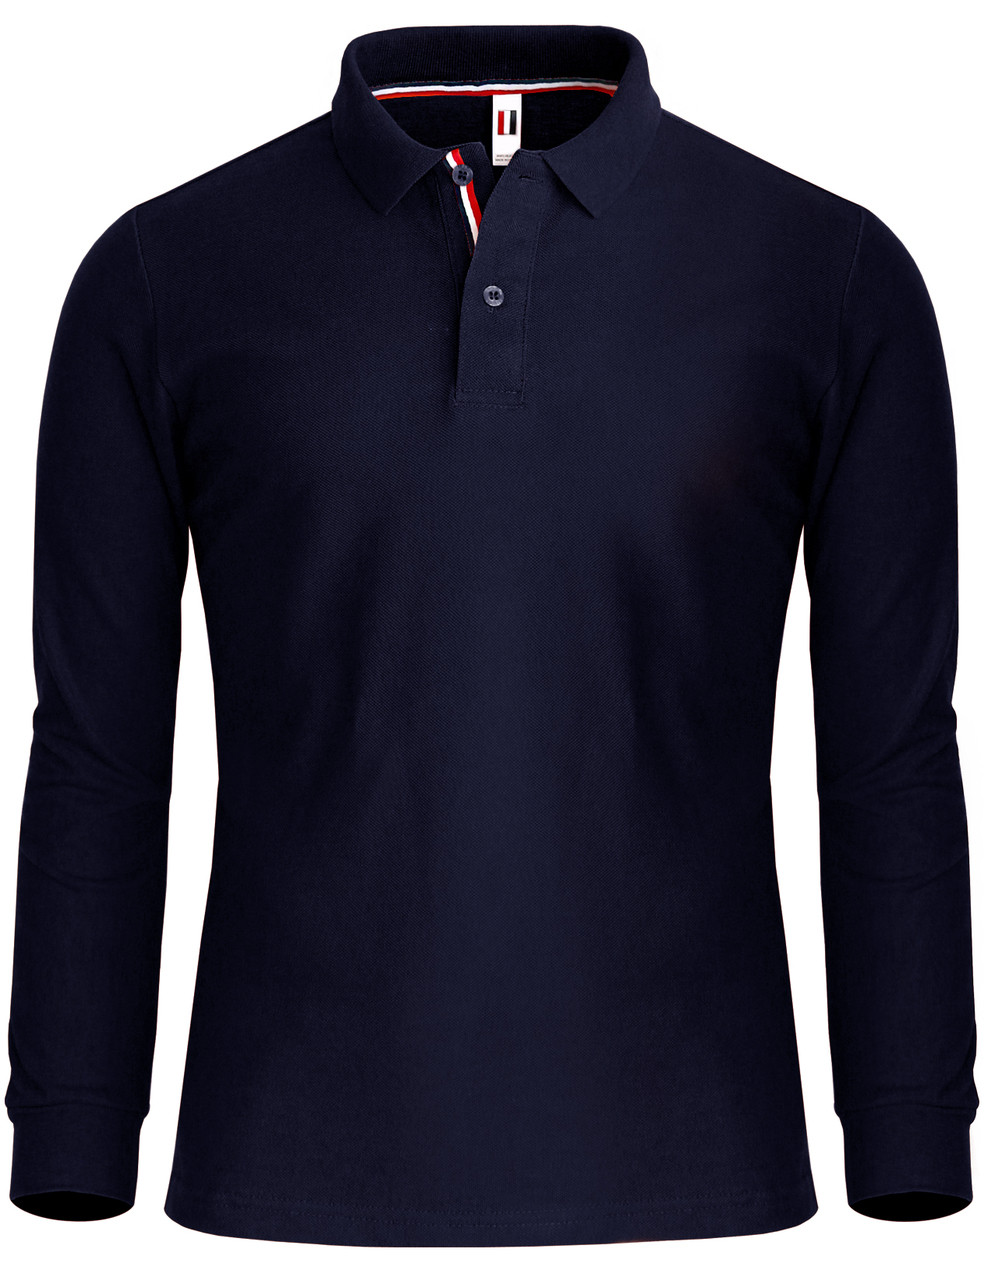 5.11 Work Gear Men's Professional Long Sleeve Polo Shirt, Cotton Pique  Knit, Reinforced Seams, Dark Navy, X-Large, Style 42056 